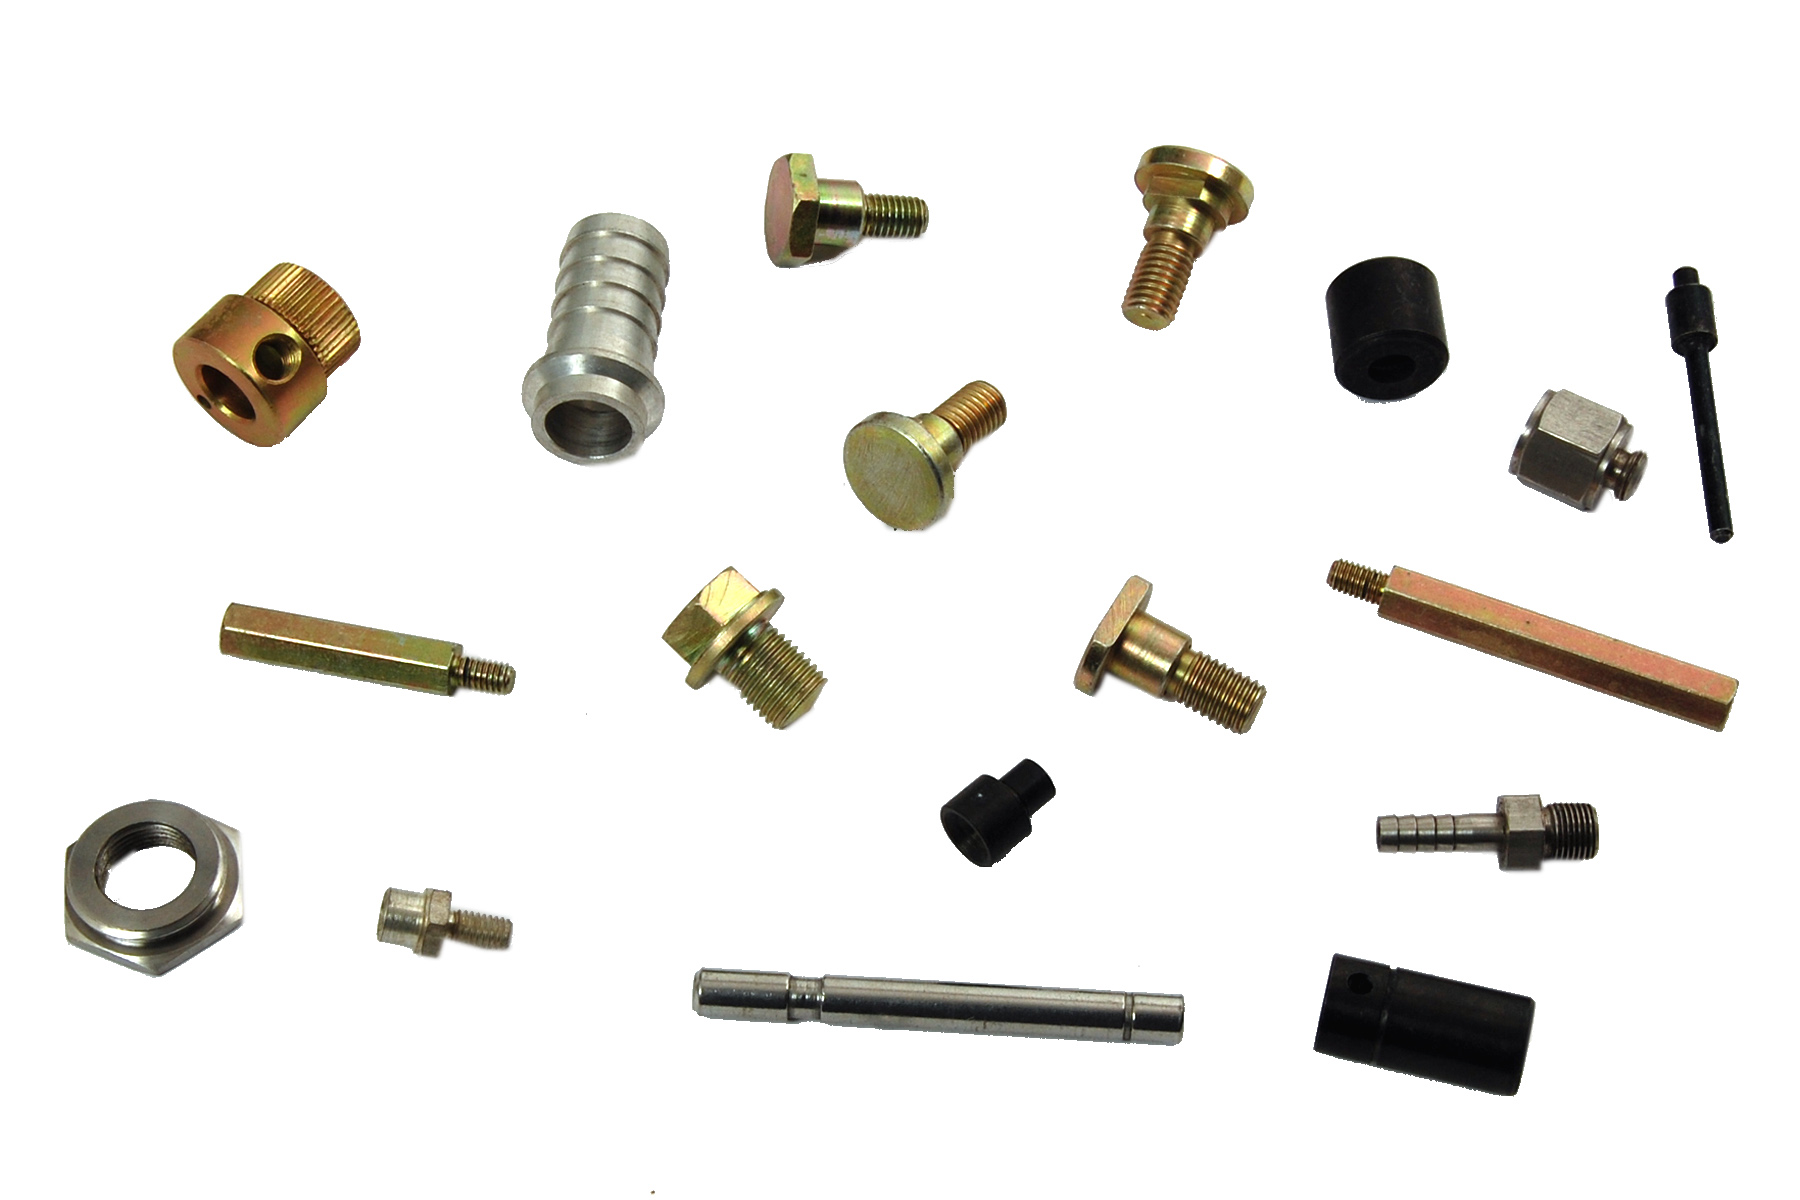 PRECISION TURNED COMPONENTS